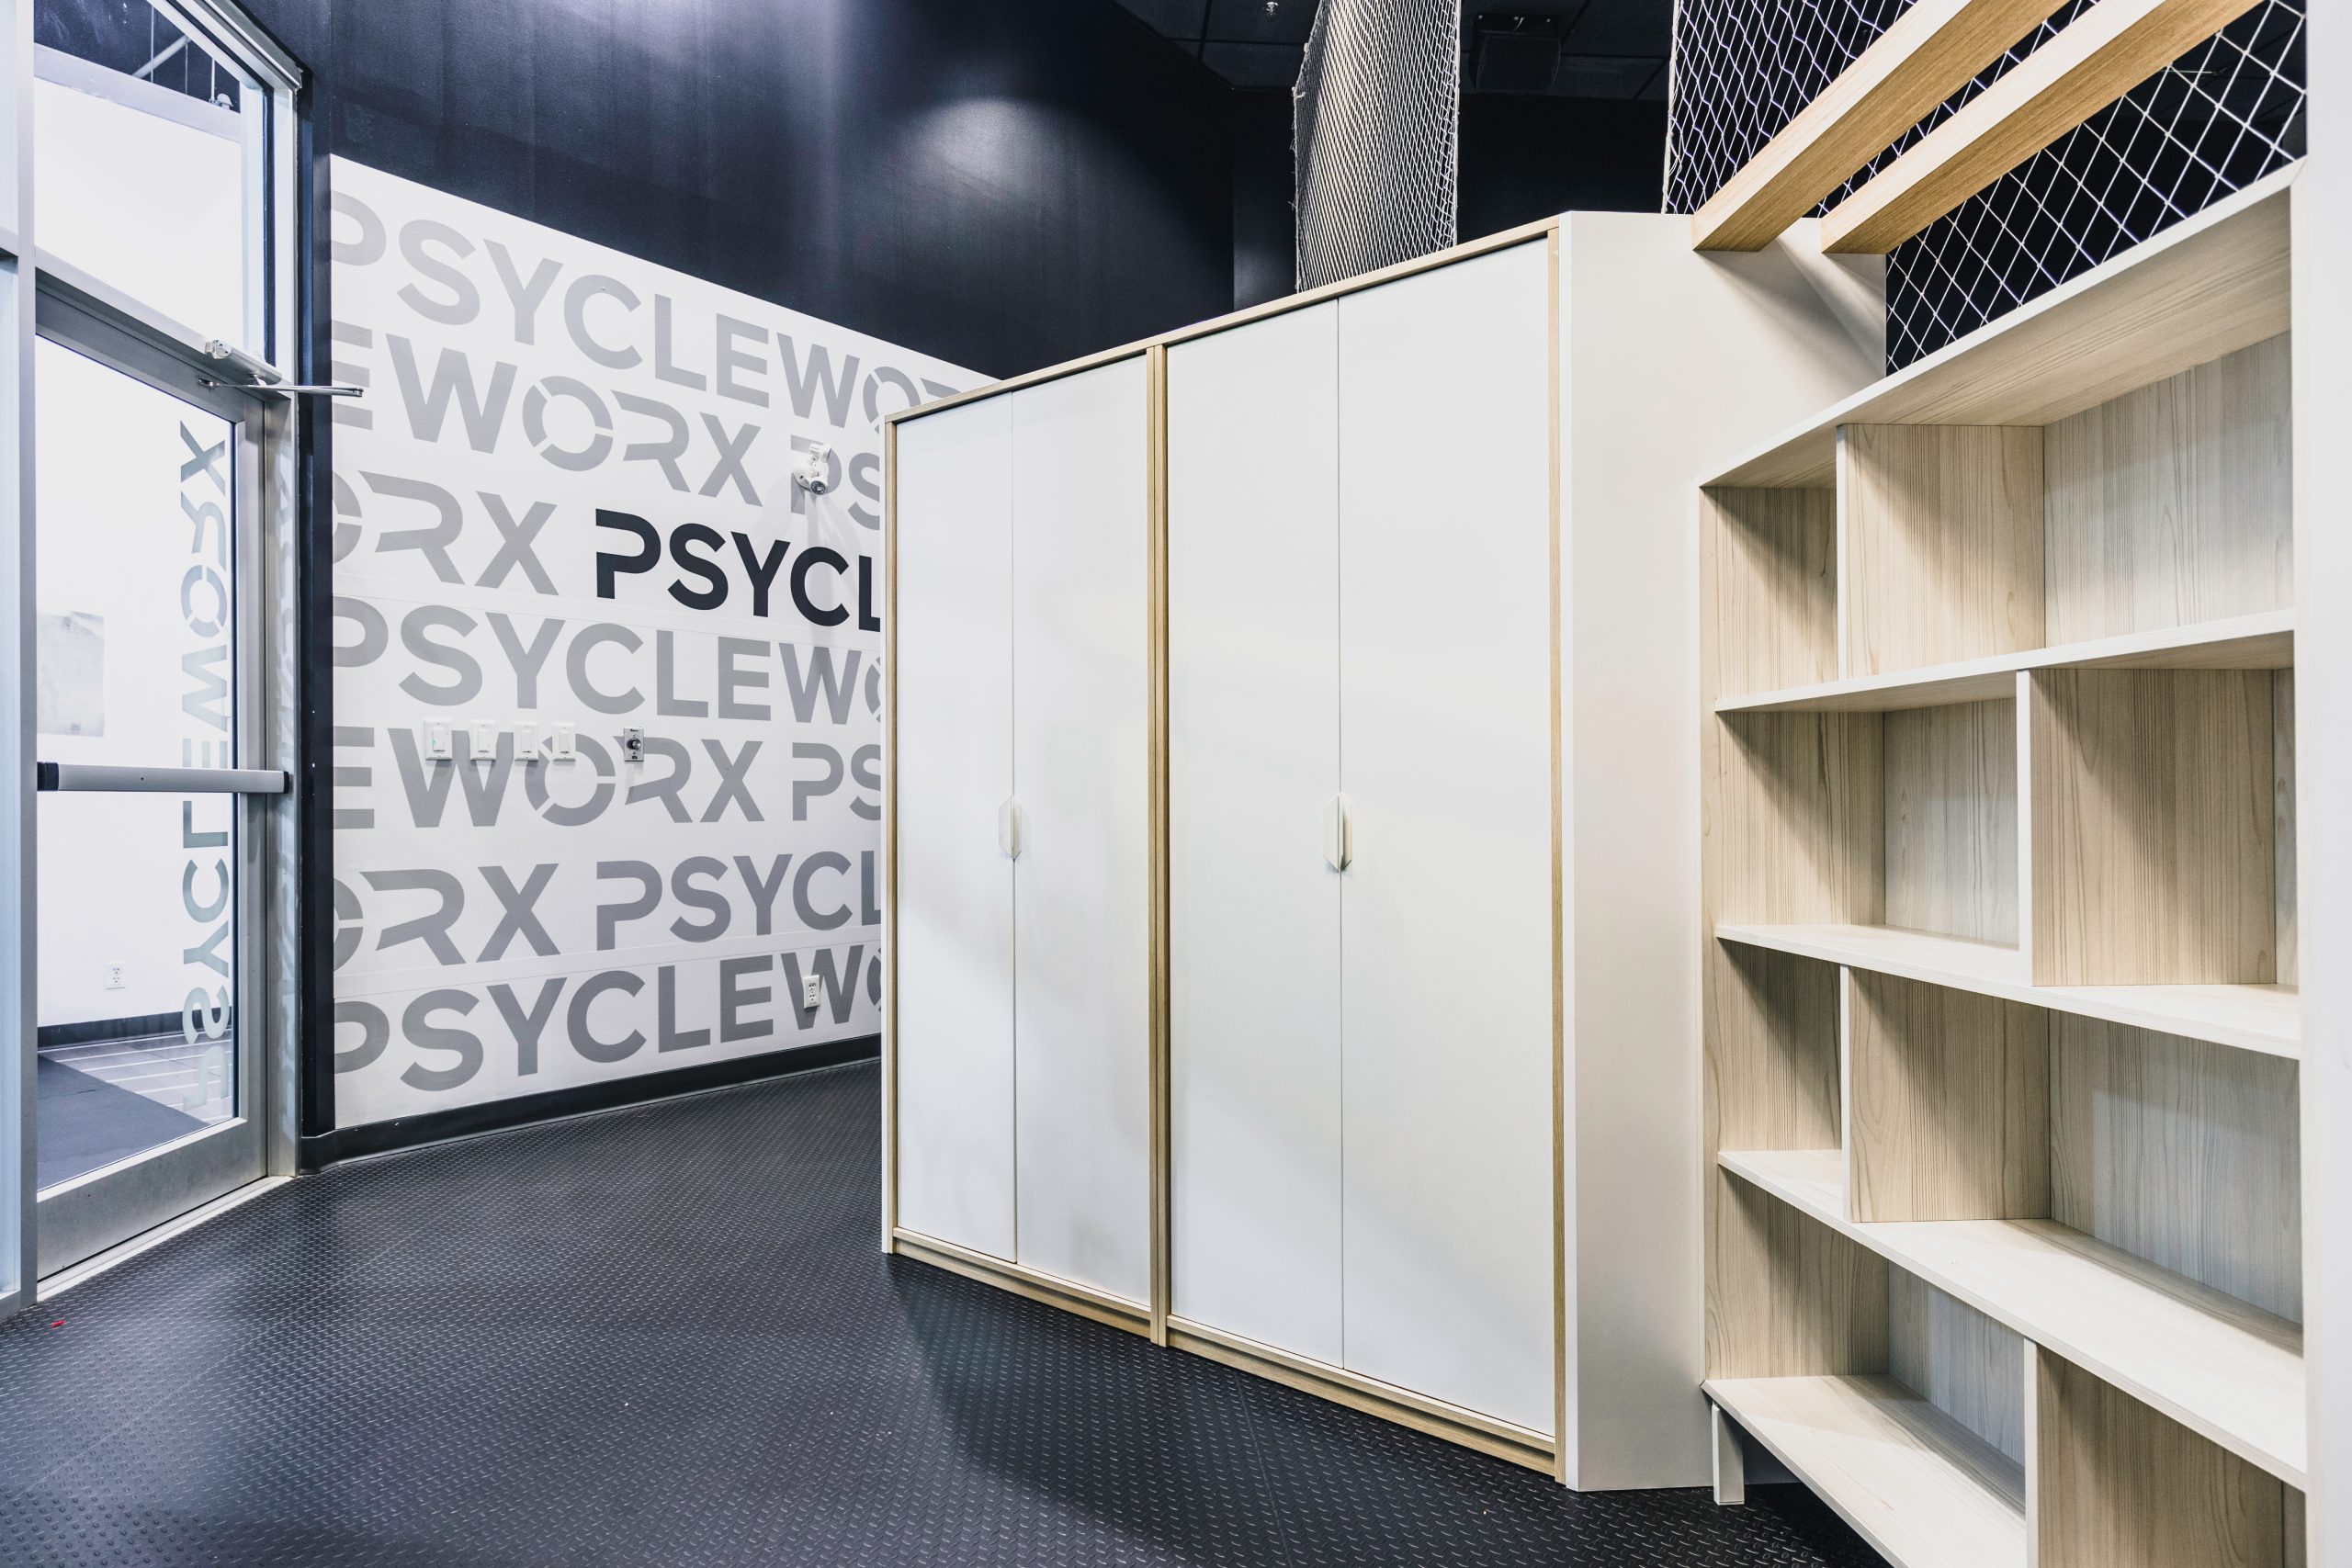 Psycleworx in Surrey BC   by Cutler